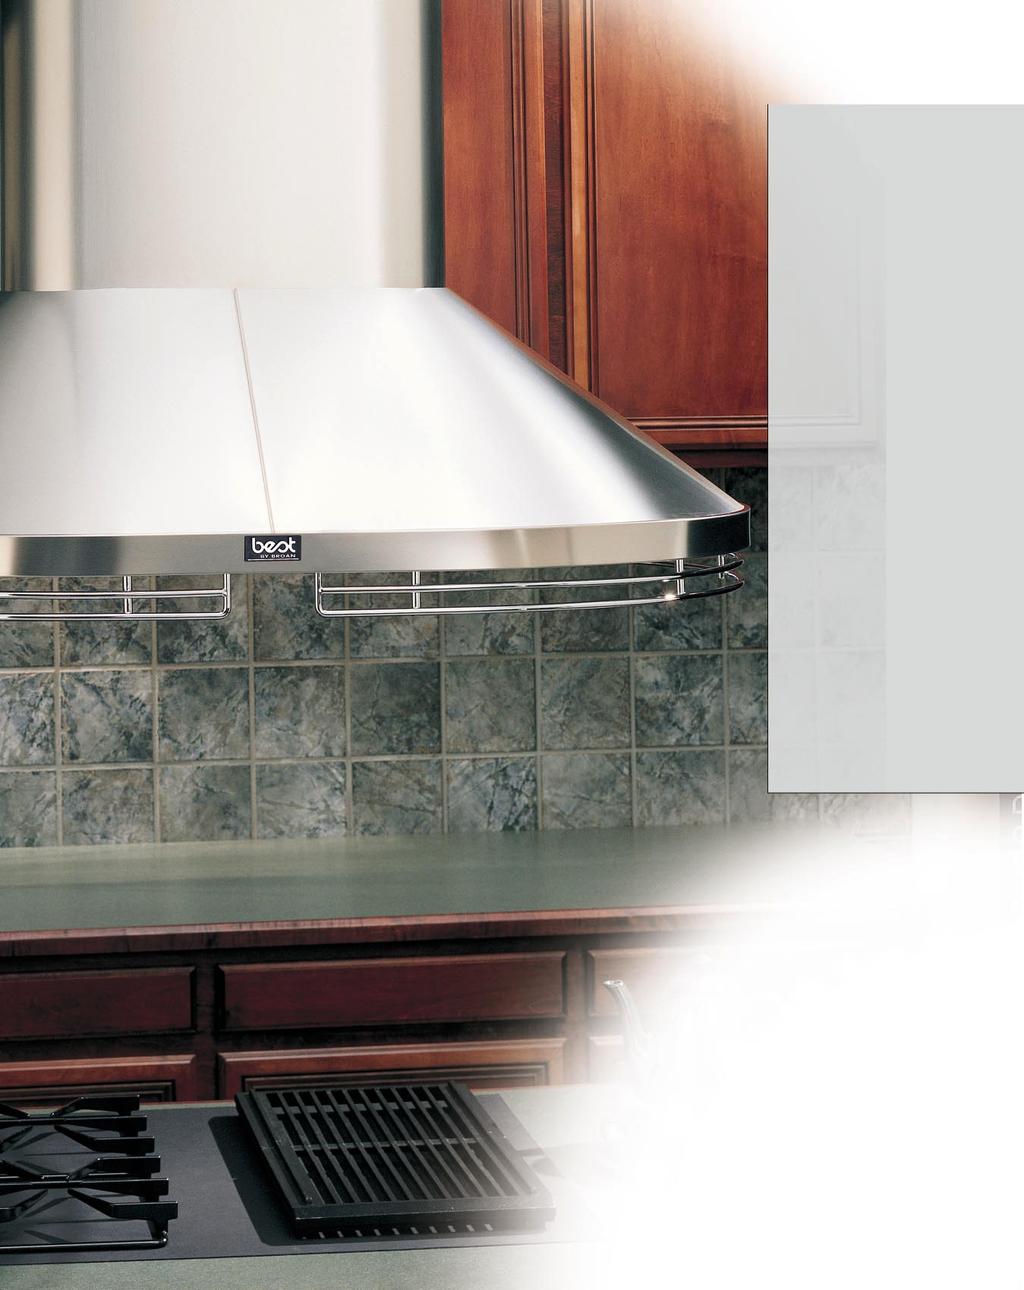 ISLAND HOODS At times the most simple designs are the most inspirational. This is the kind of range hood that inspires many to say, Now that s perfect.